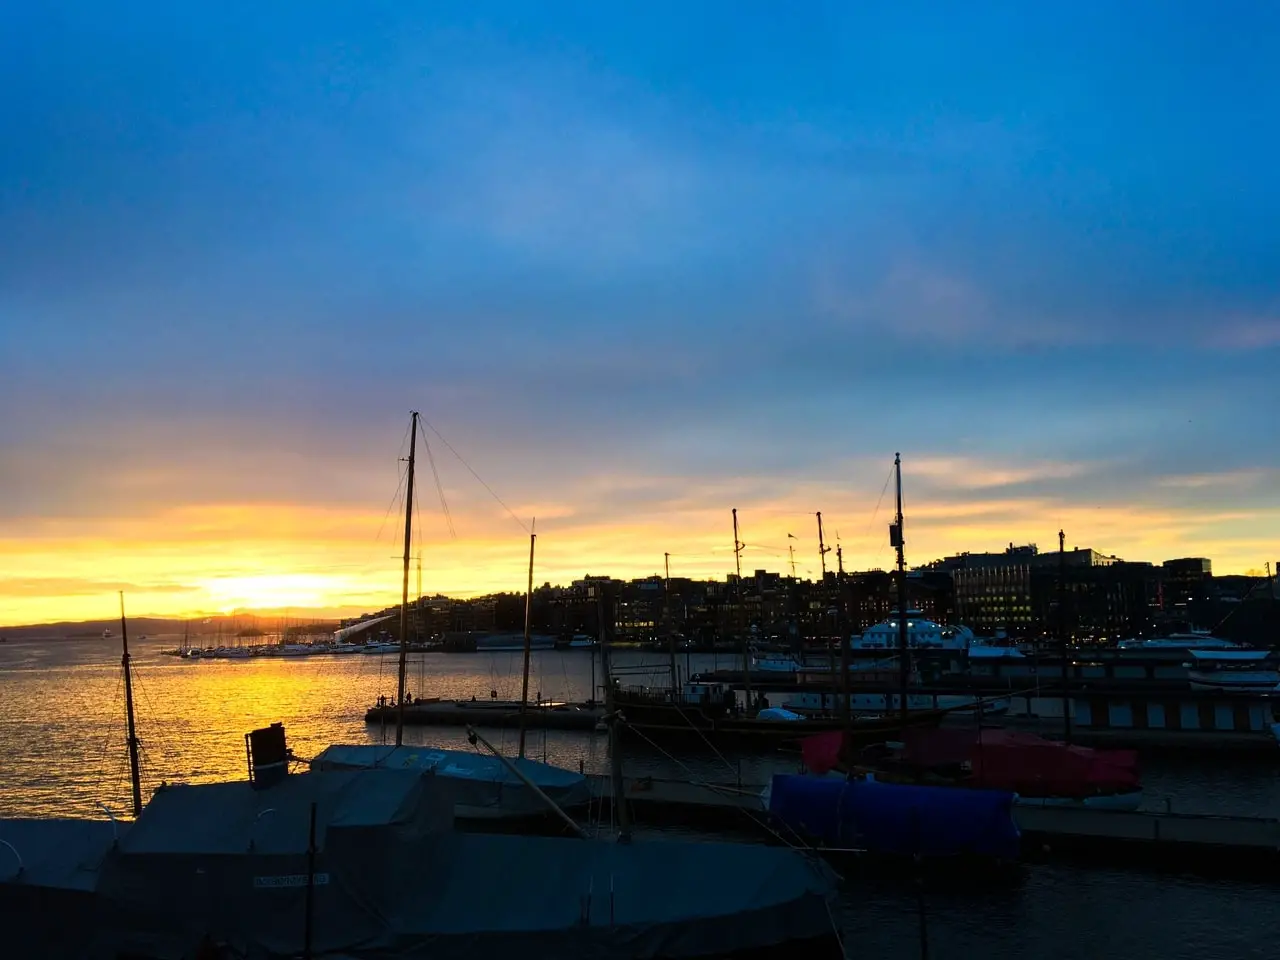 The Oslo Harbour at sunset